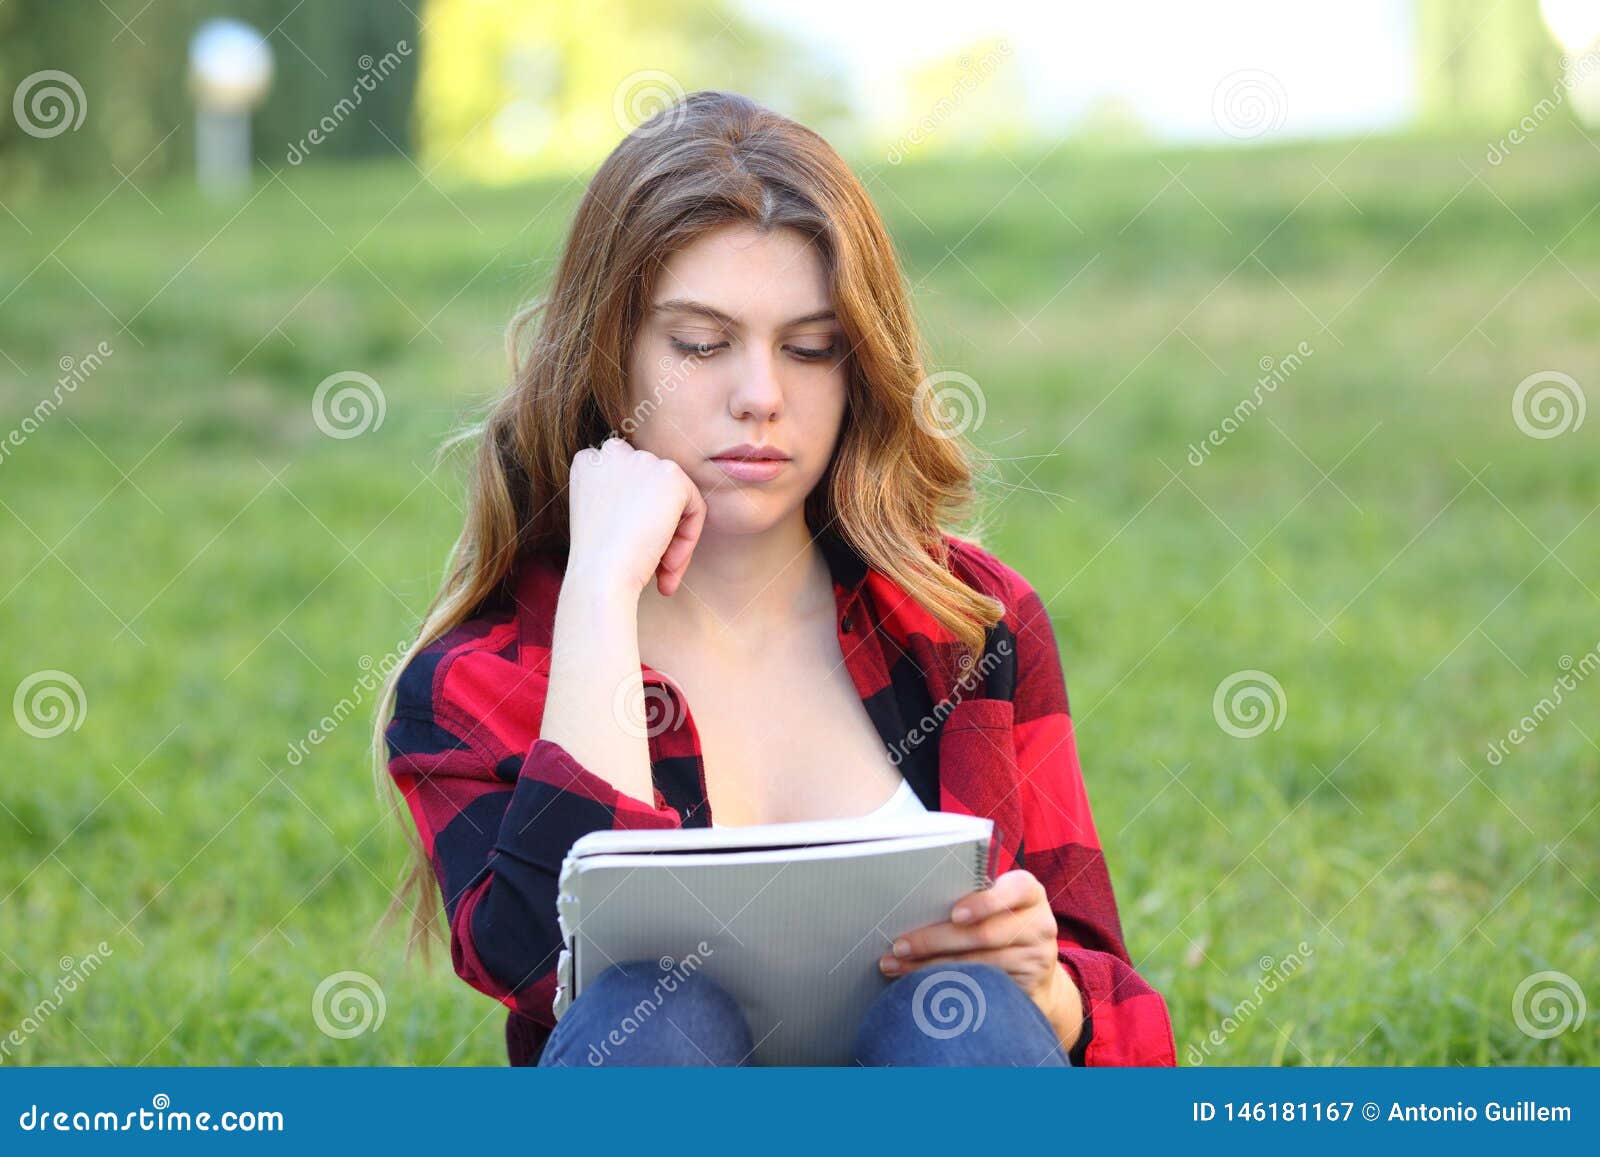 student studying memorizing notes on the grass